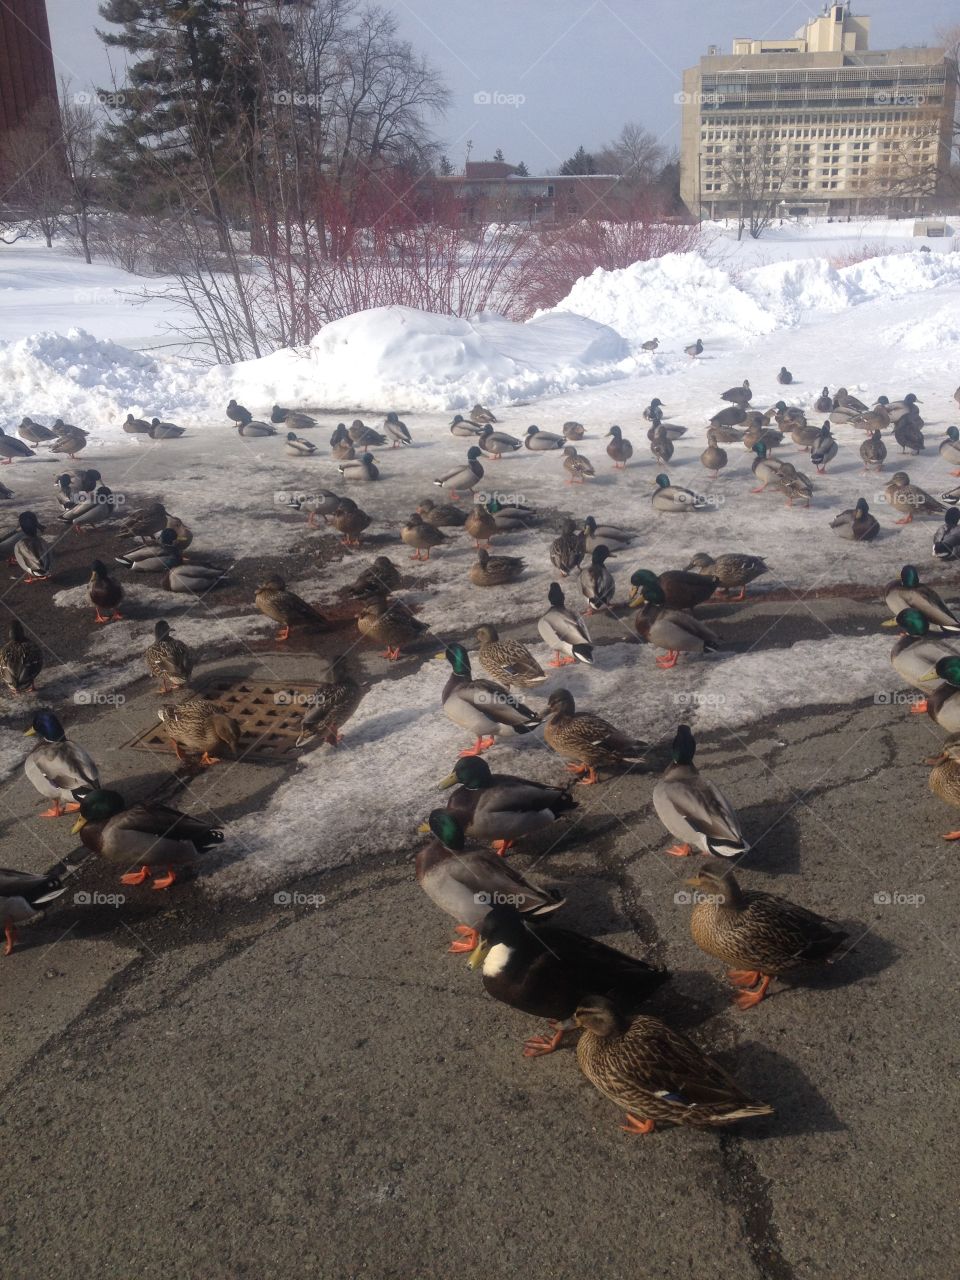 Ducks in the winter at UMass